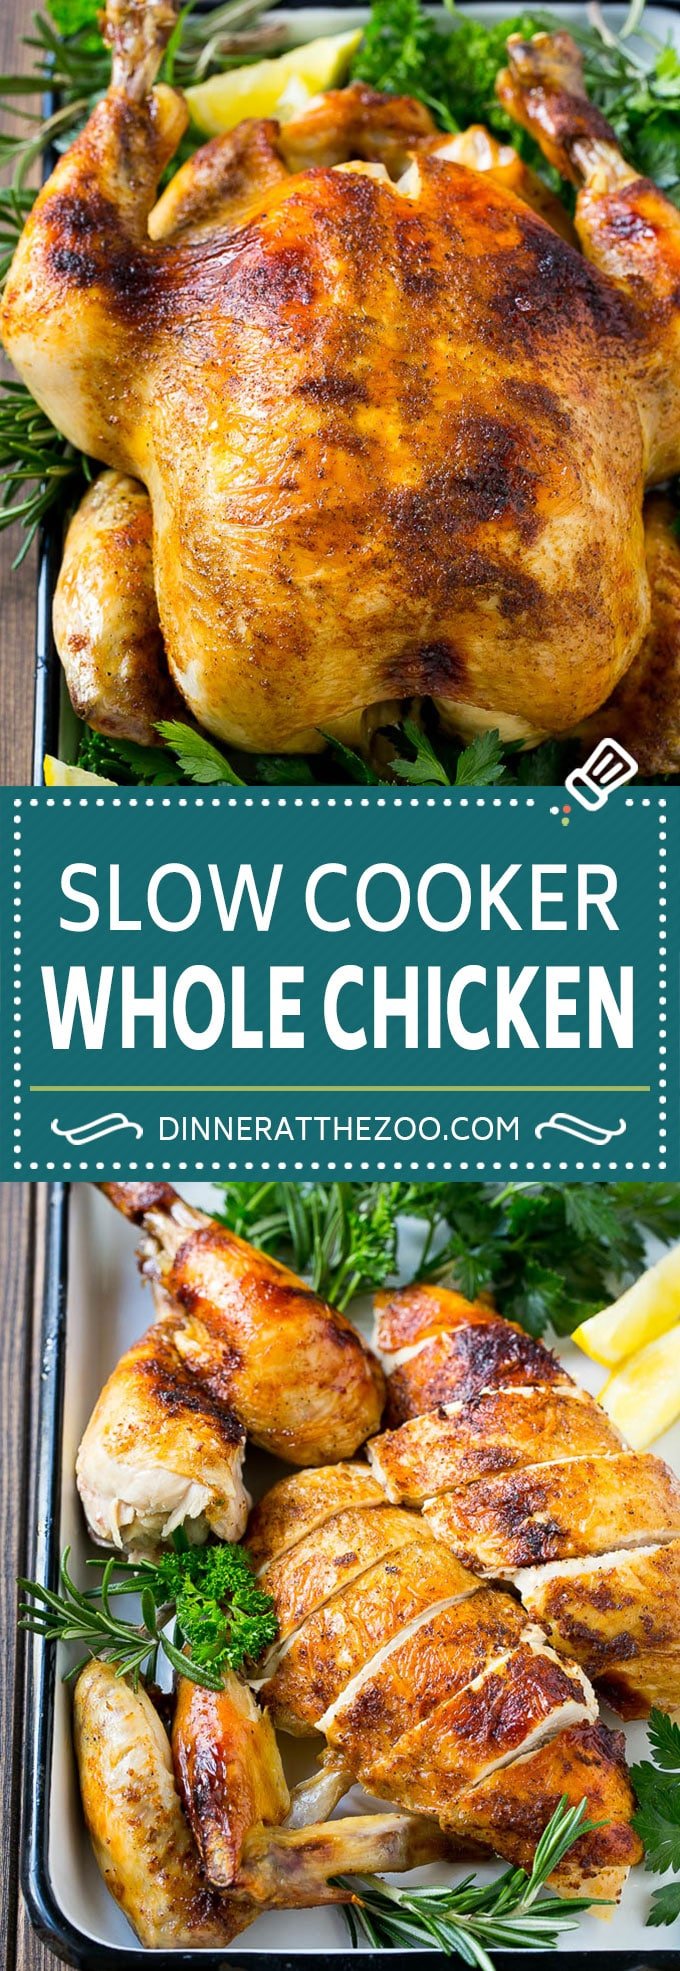 Slow Cooker Whole Chicken | Slow Cooker Rotisserie Chicken | Crock Pot Roasted Chicken | Crock Pot Whole Chicken #chicken #slowcooker #crockpot #glutenfree #dinner #dinneratthezoo